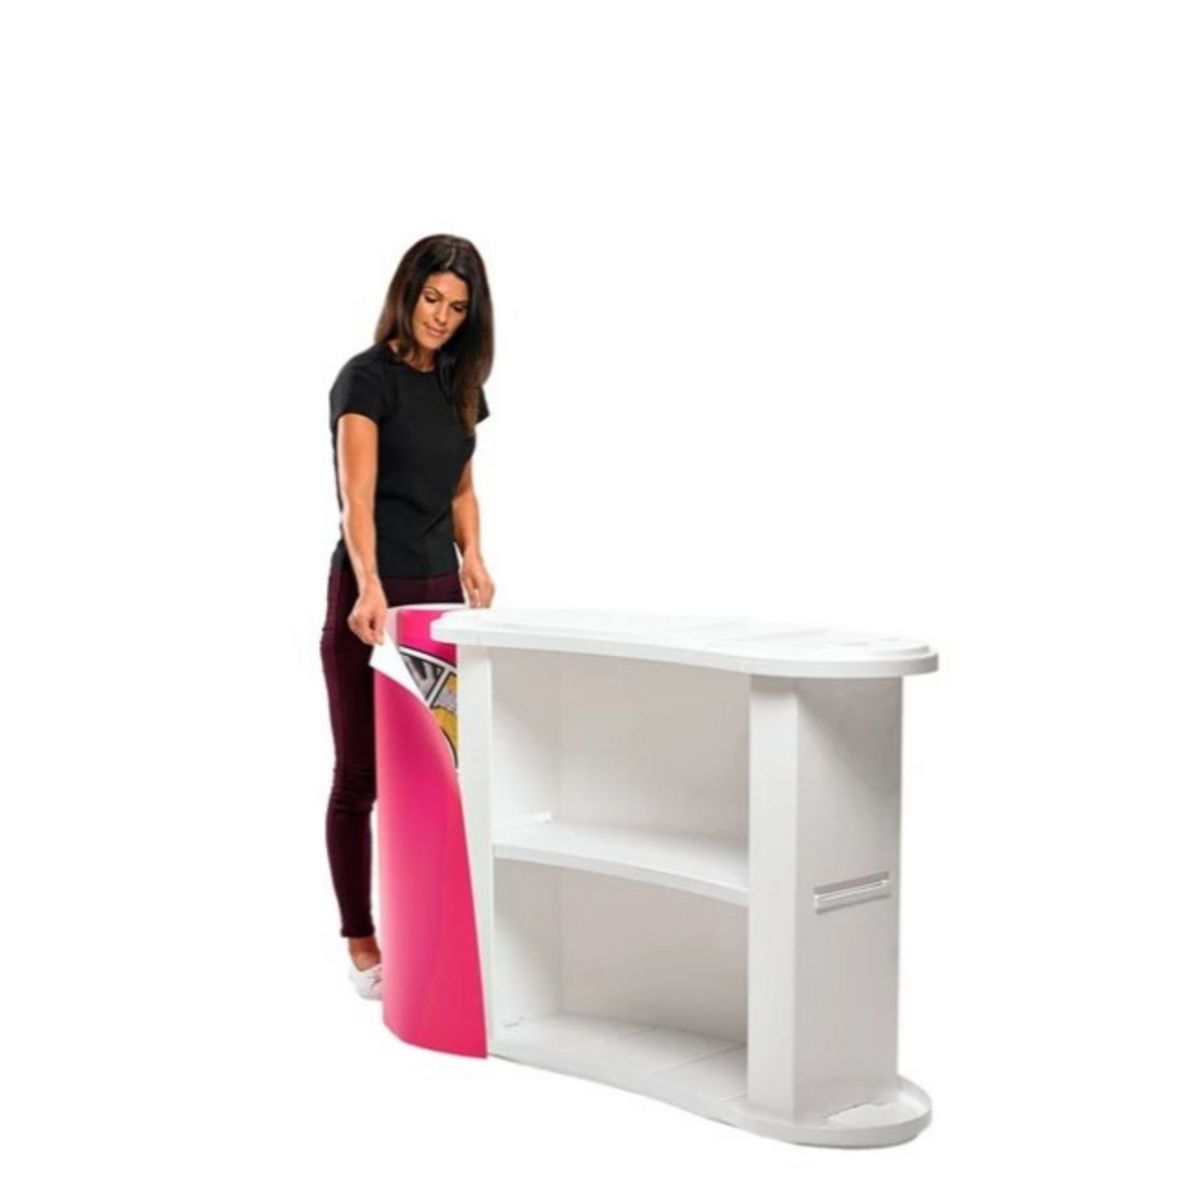 Lady adding the Marvin Magic graphic to the Finesse promotional display counter..jpg